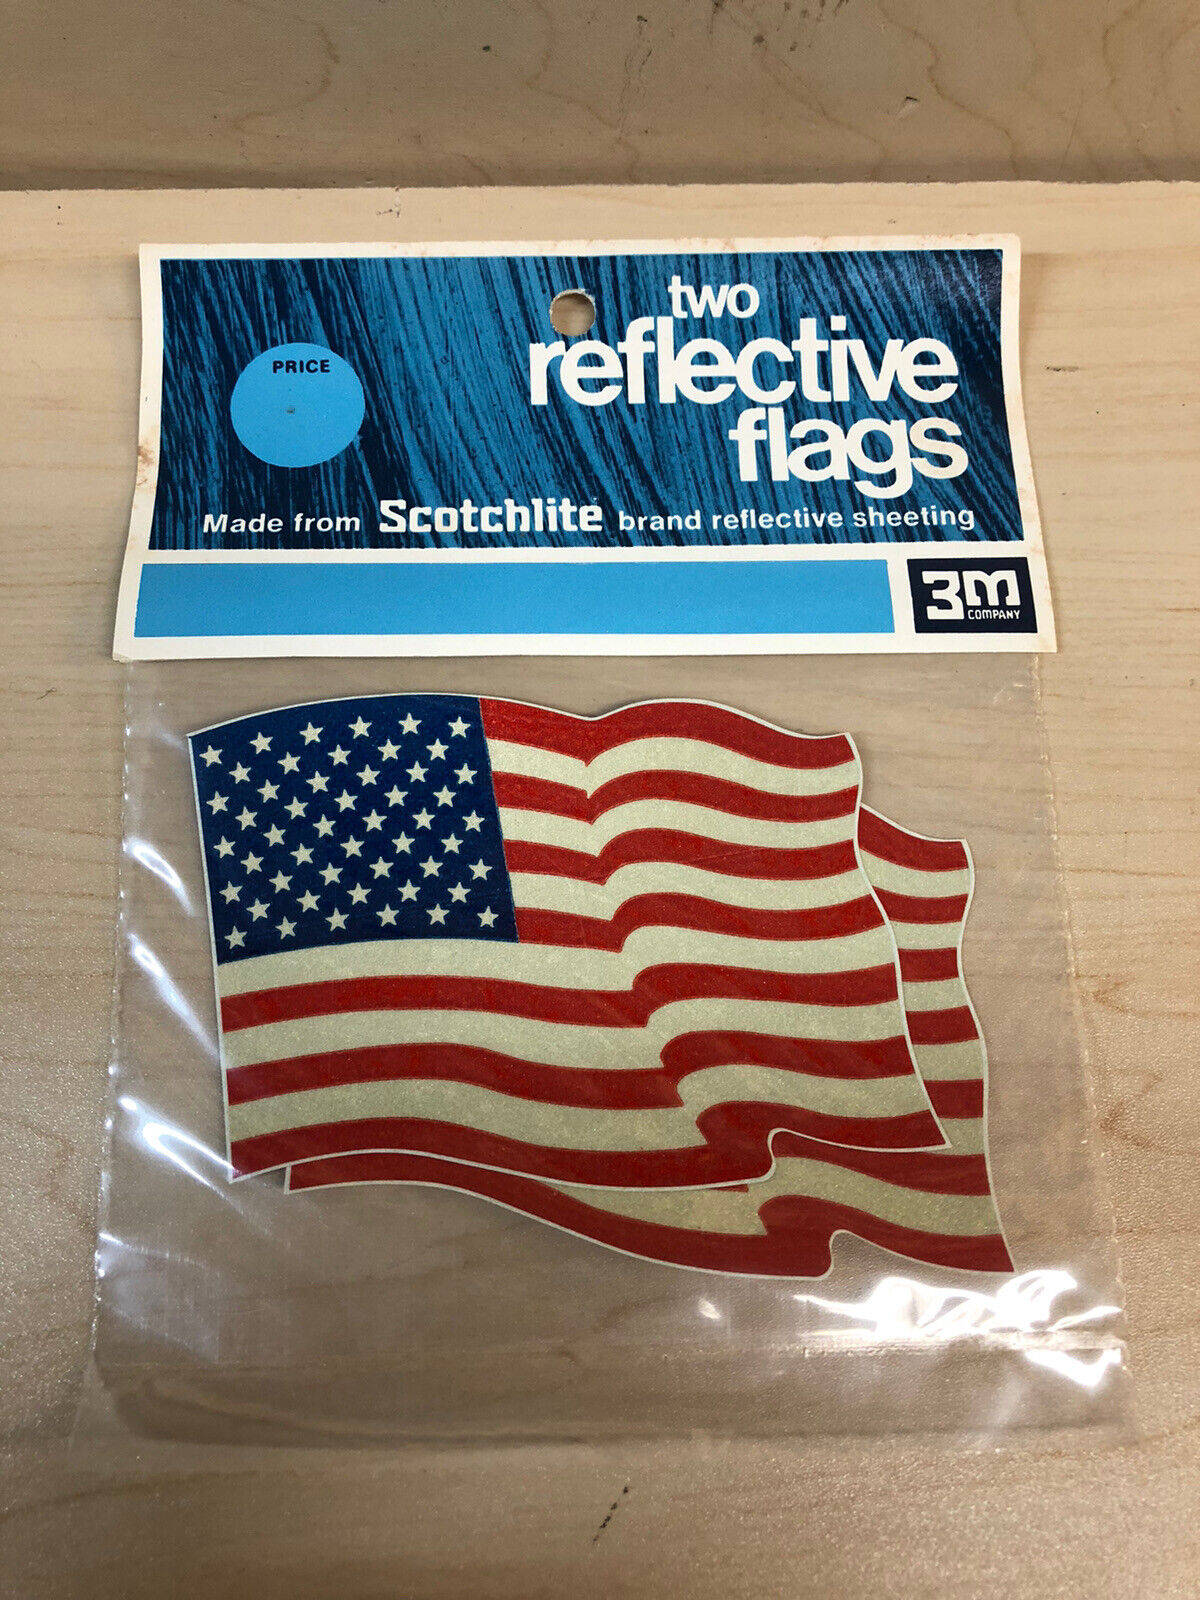 Vintage 3M Co. Reflective USA Sticker Flags Made In USA Scotchlite (2 In Pack)